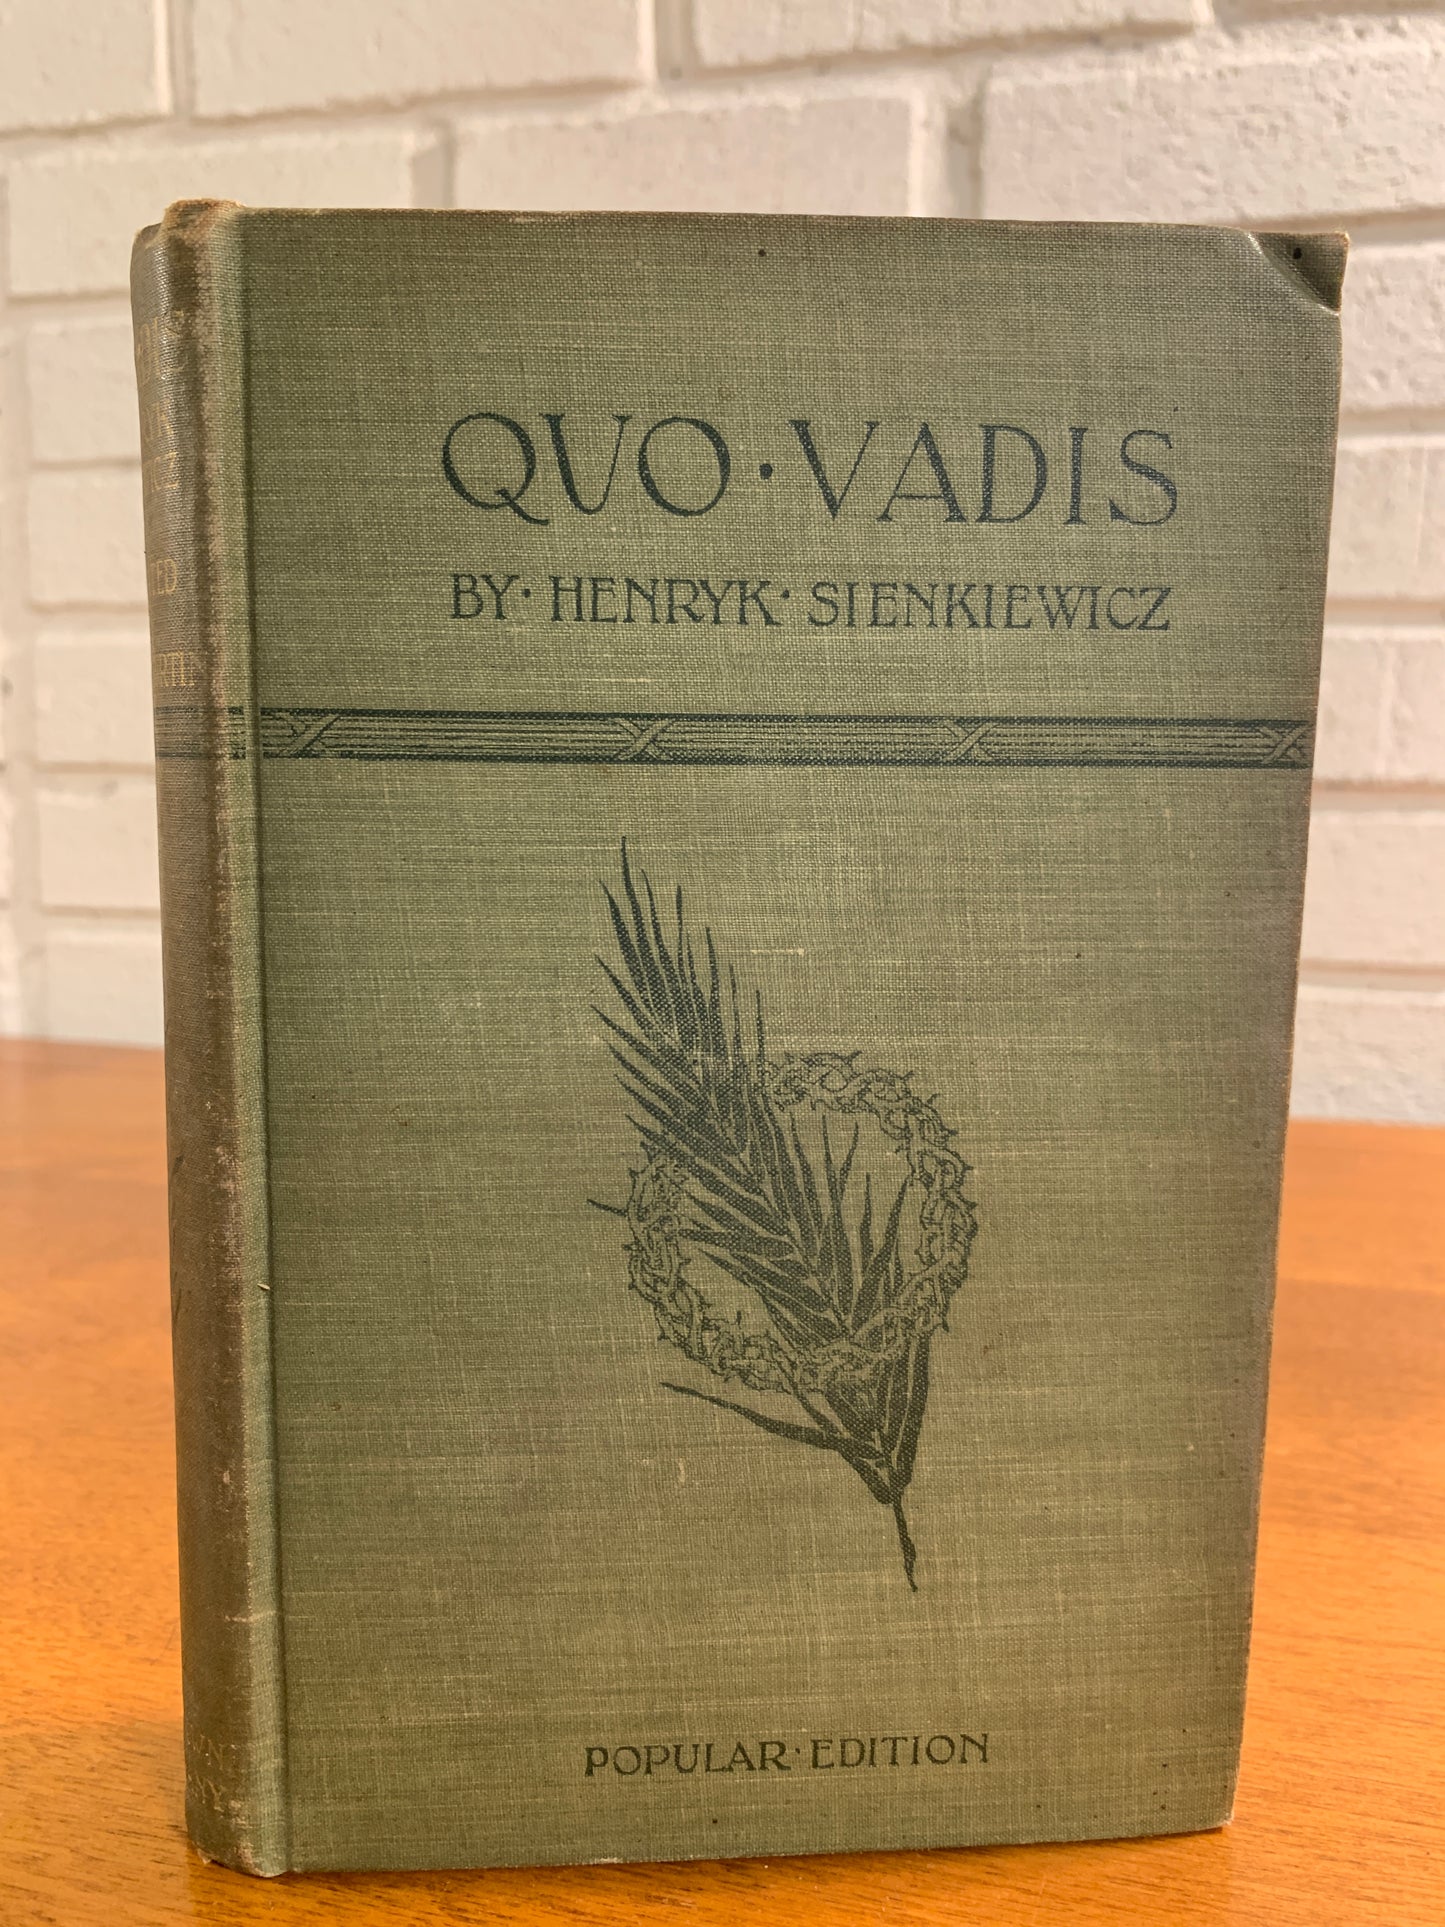 Quo Vadis, A Narrative of the Time of Nero by Henryk Sienkiewicz [1897]